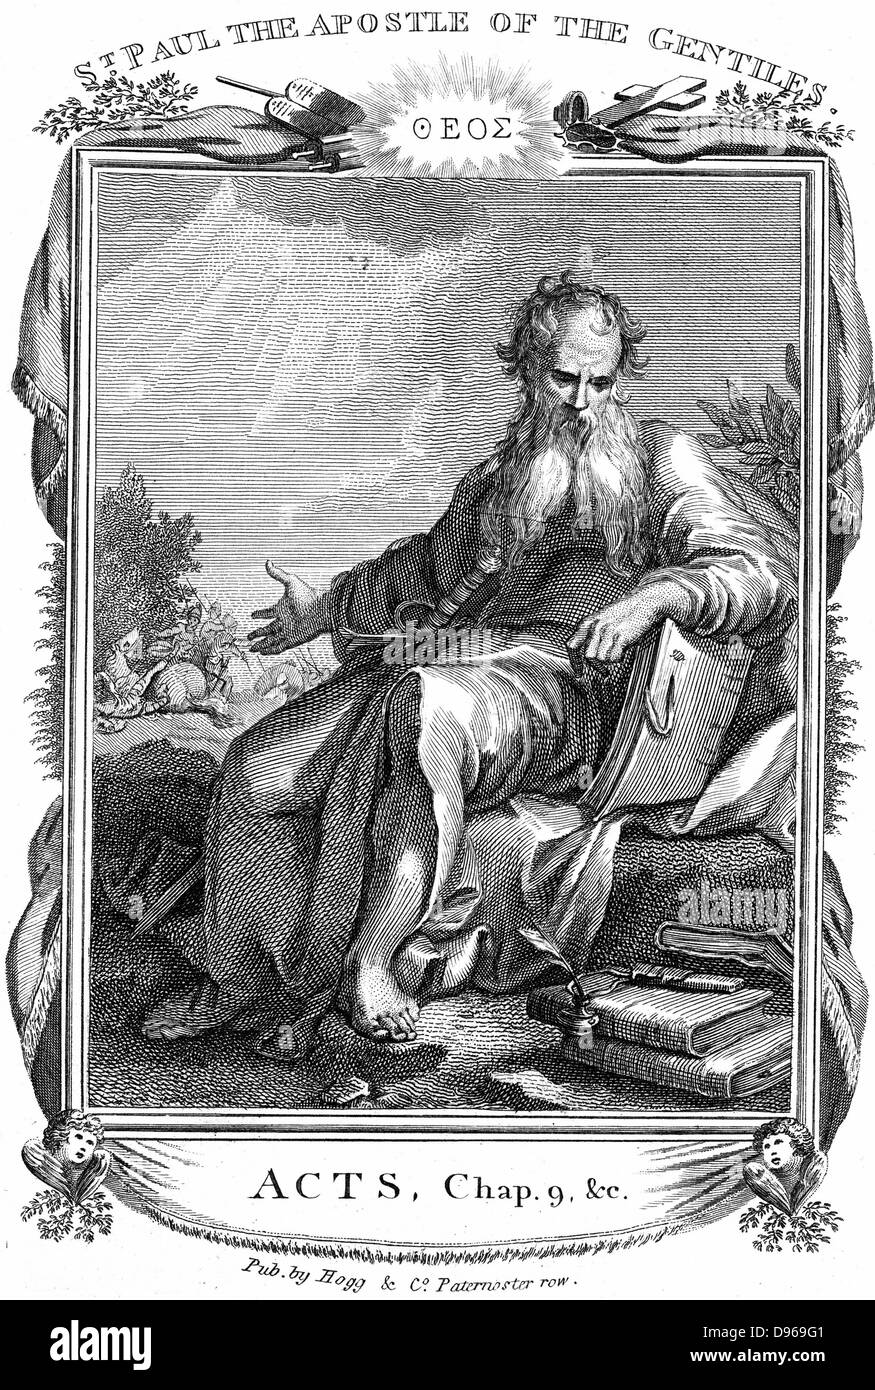 St Paul the Apostle who took Christian message to the Gentiles. In background is his conversion on road to Damascus.  At his feet are books and writing materials representing his Epistles. Copperplate engraving early 19th century. Stock Photo